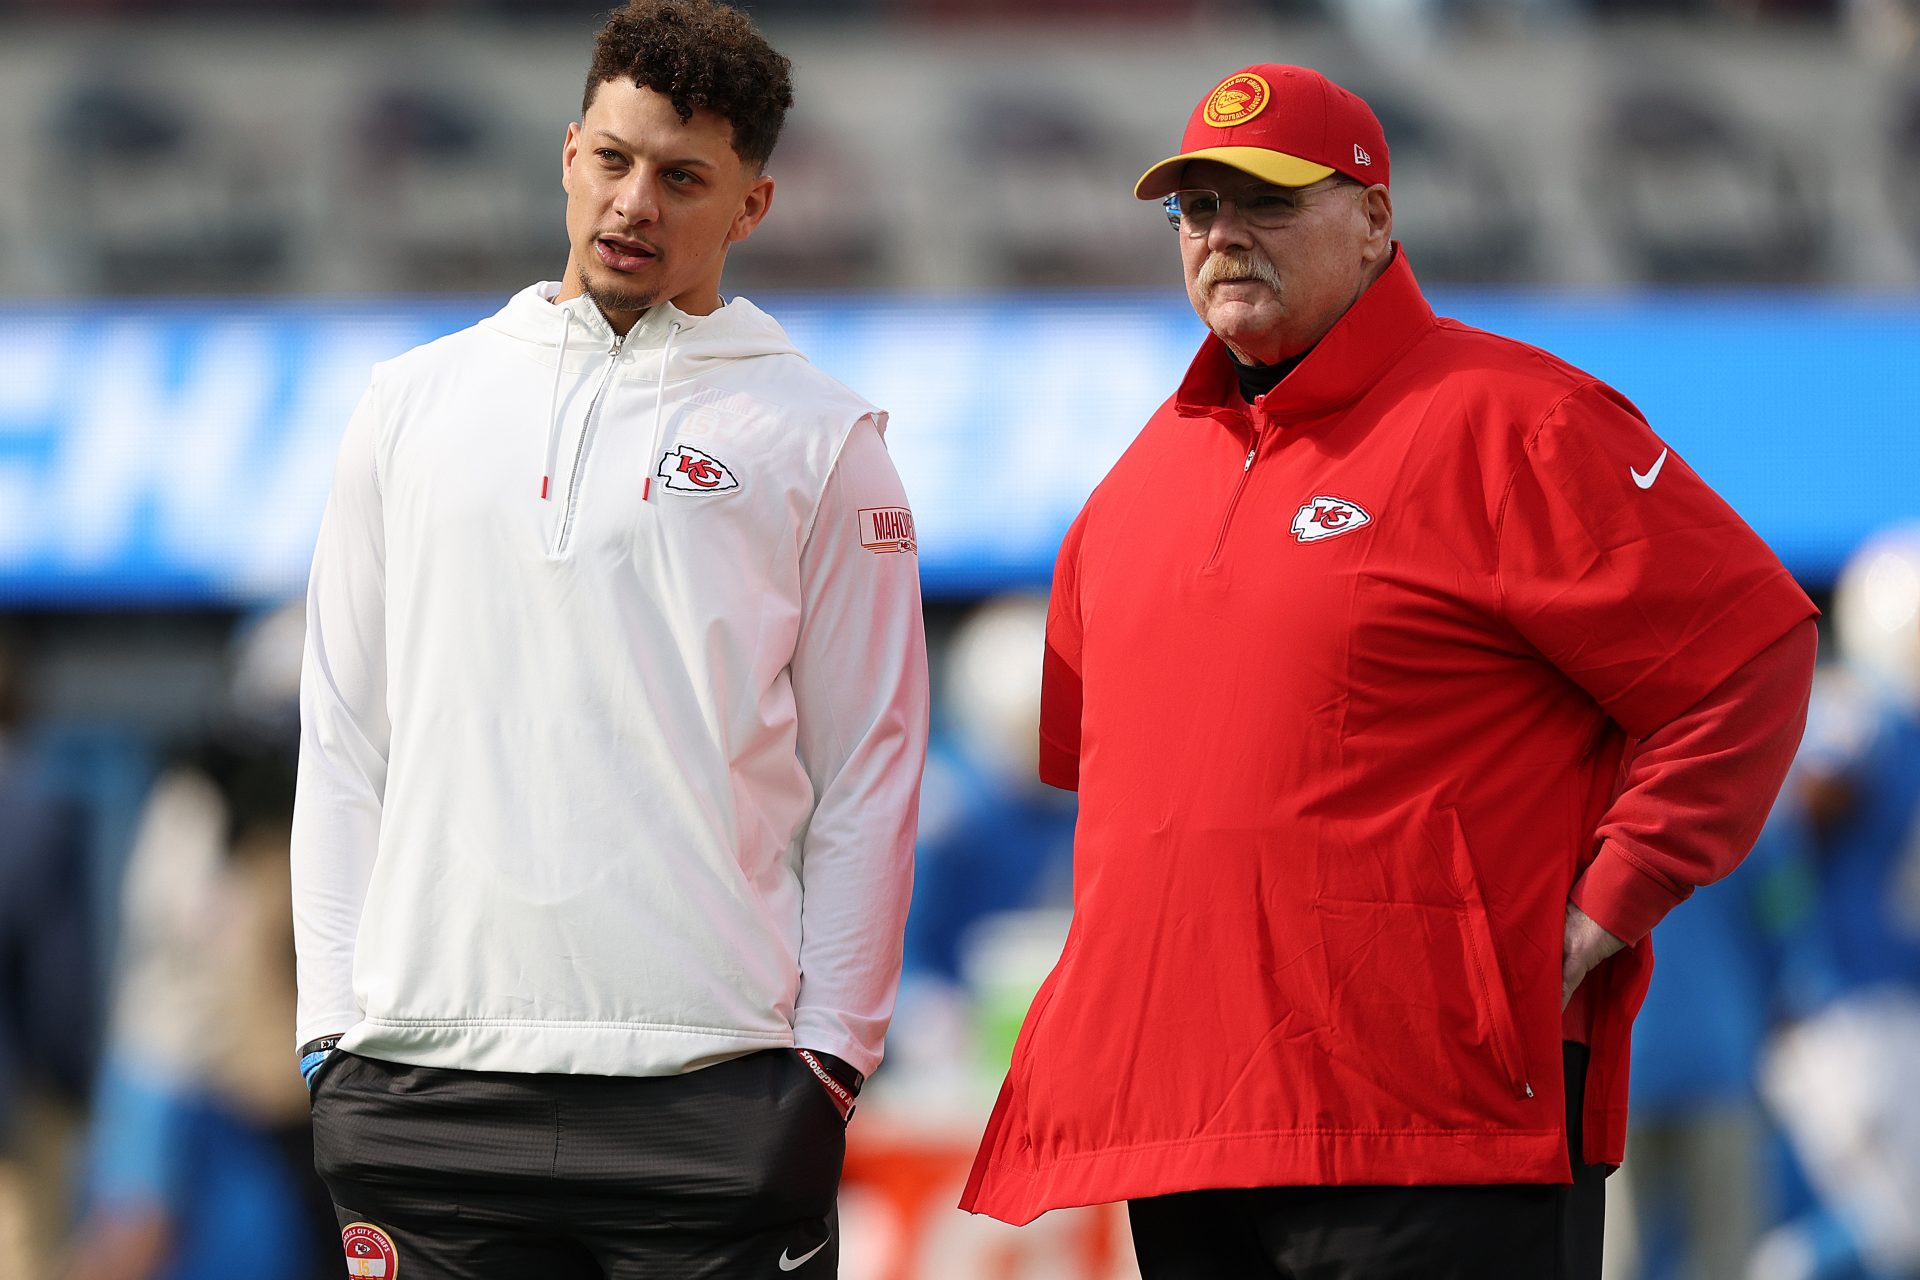 What would another Super Bowl win mean for Patrick Mahomes and Andy Reid’s place in history?